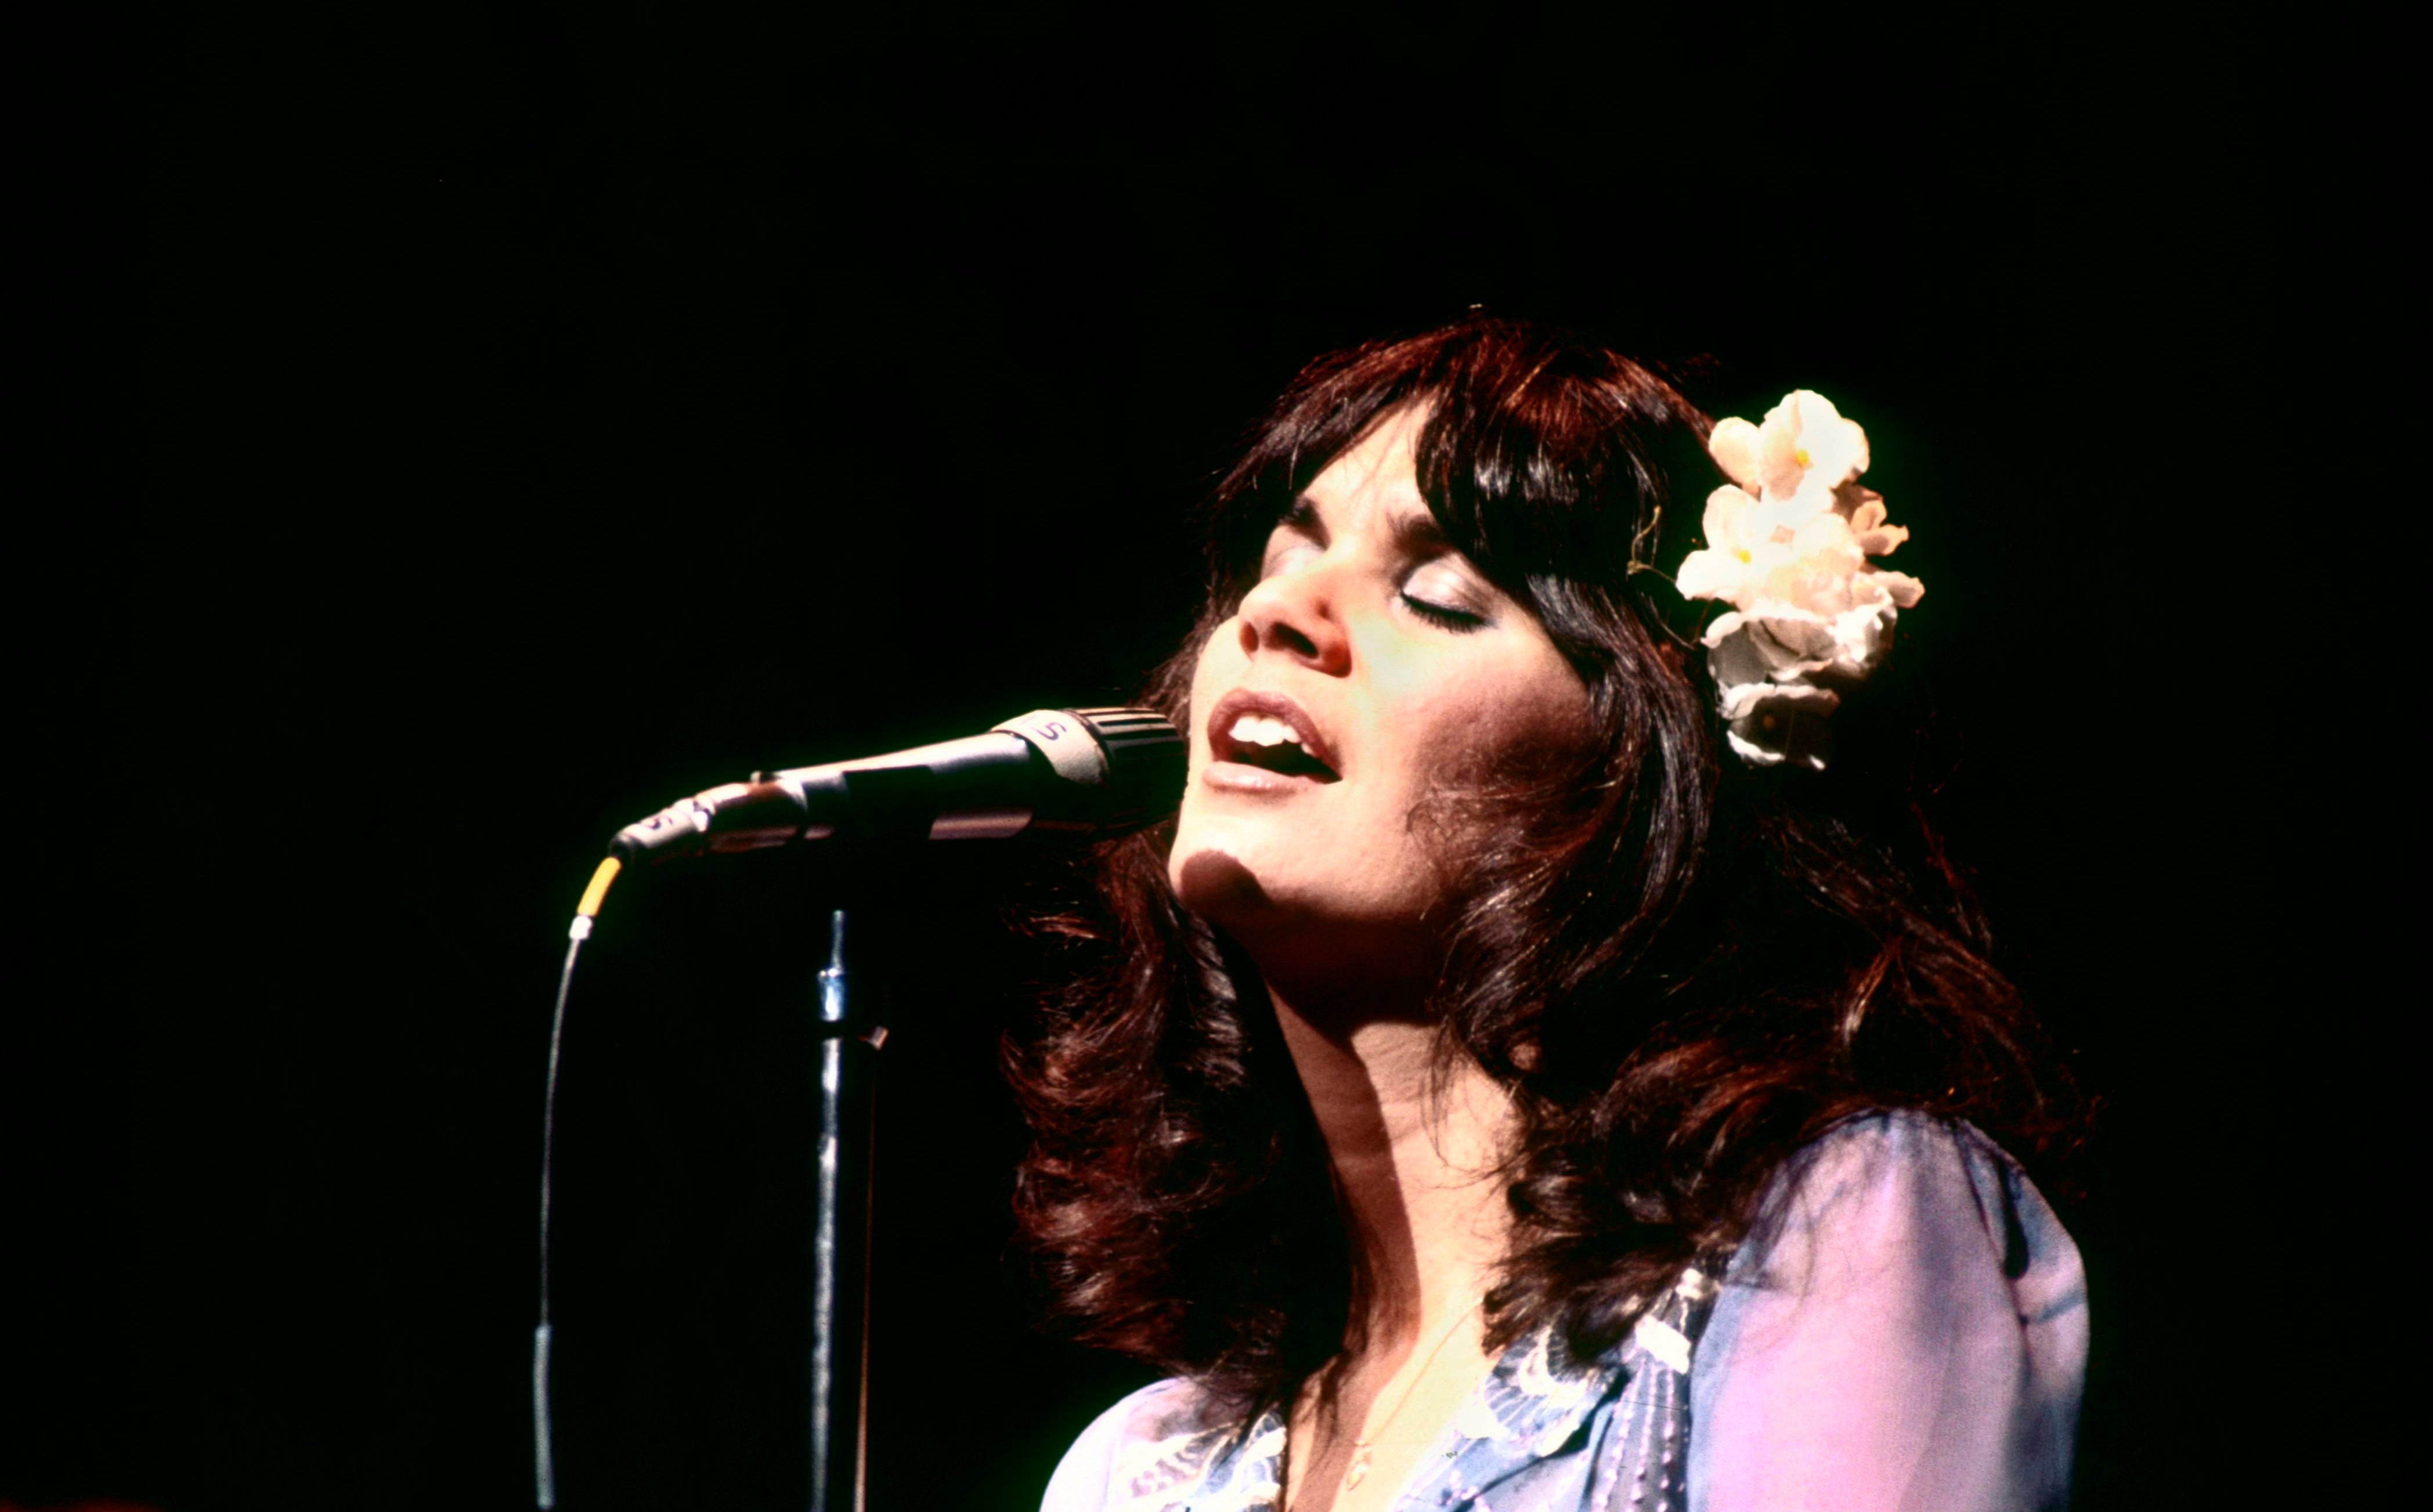 Lot - Linda Ronstadt Signed Photo 11 x 14 inches